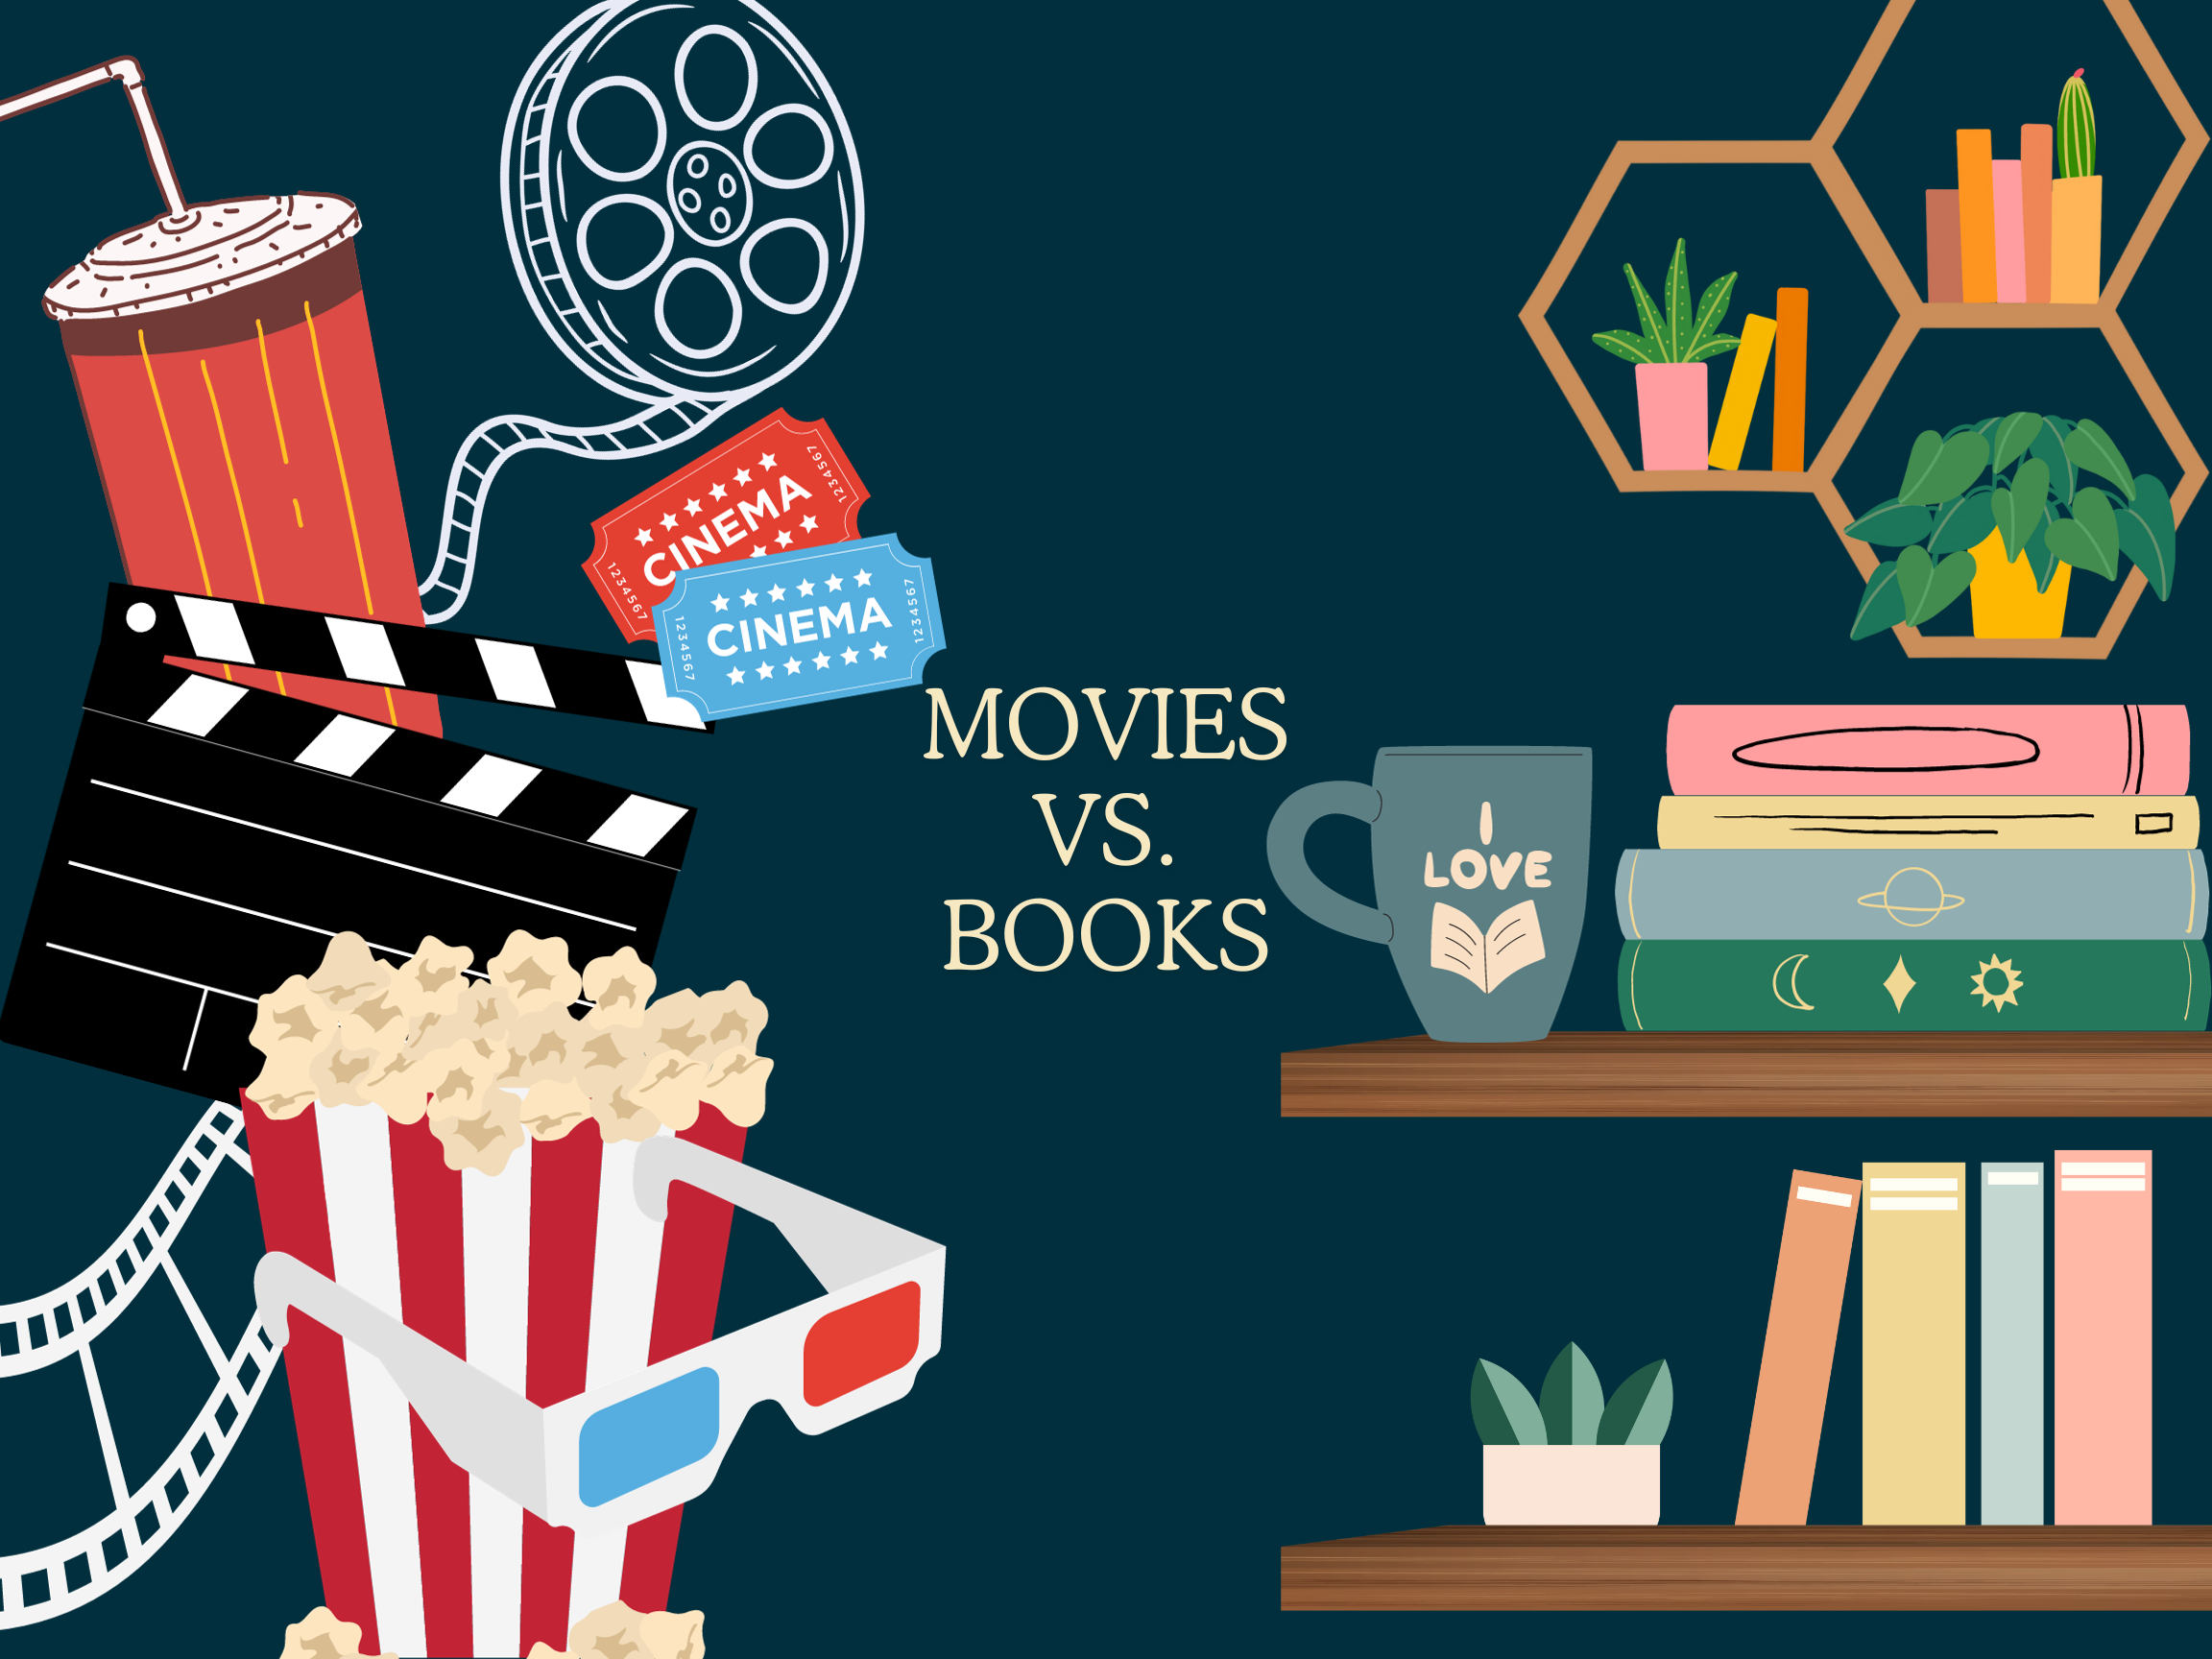 Books and movies have different factors that tell stories in distinct and entertaining ways. Which medium is considered superior?